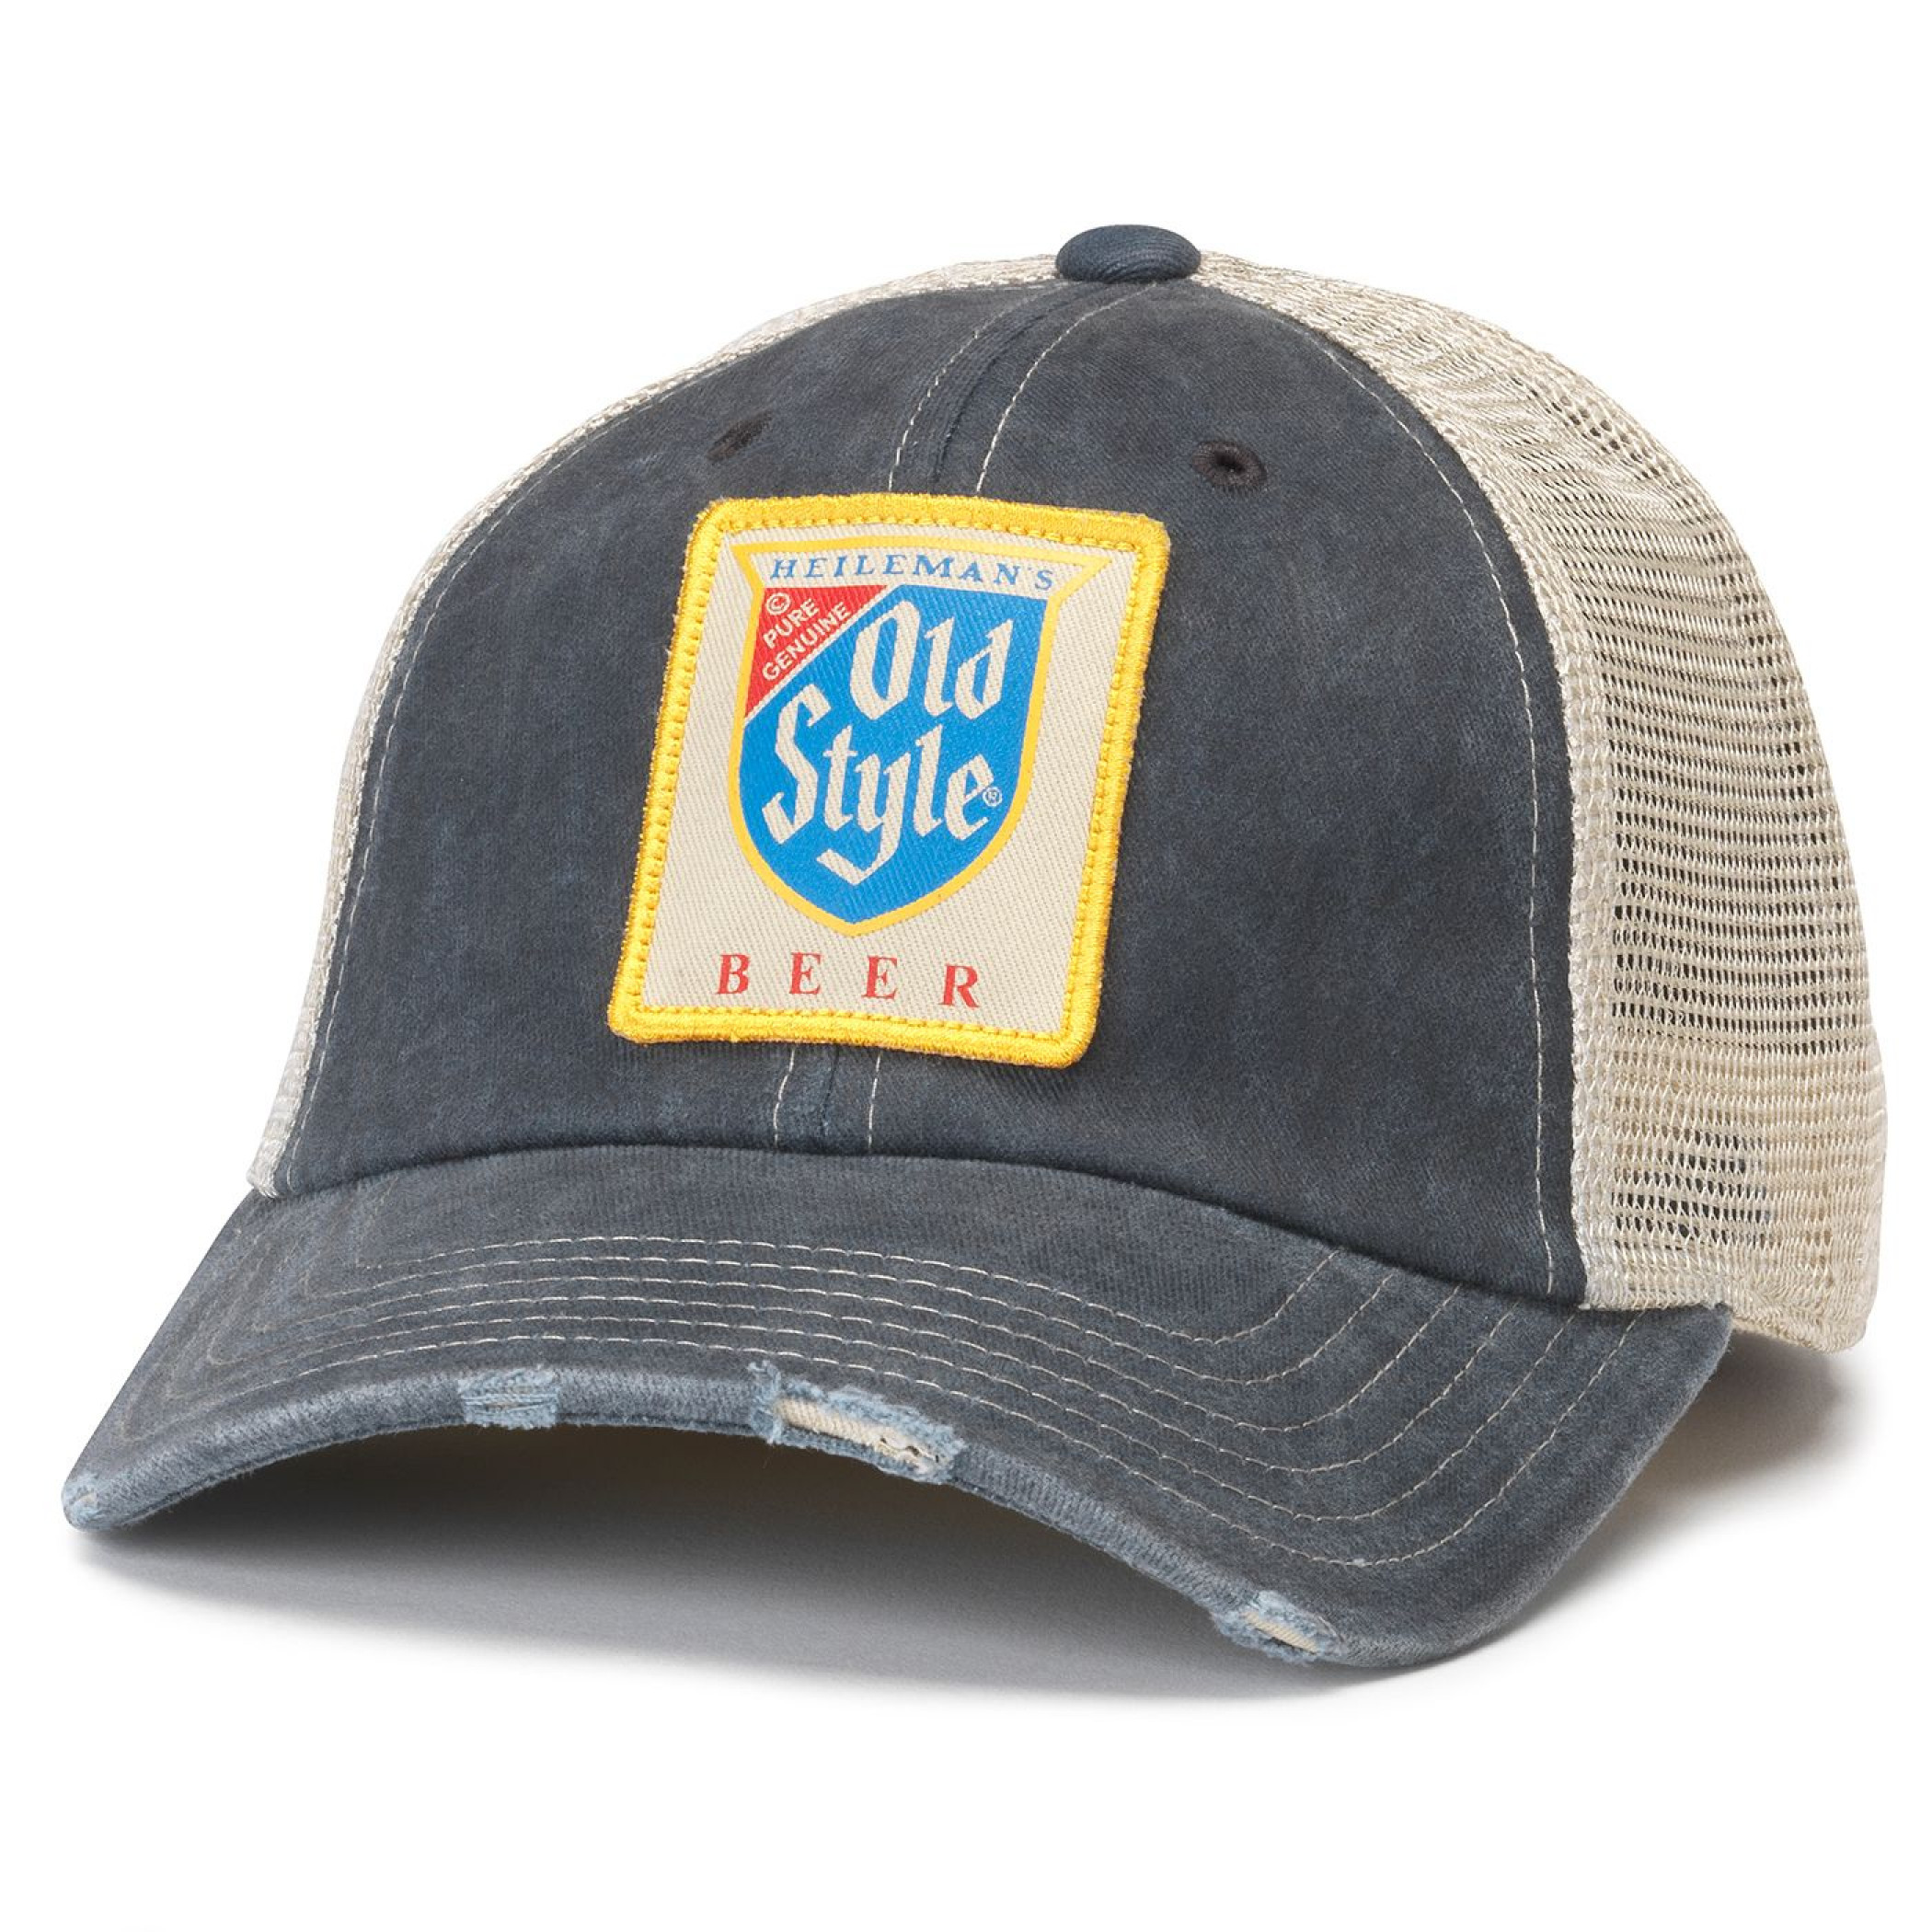 Old Style Label Blue Colorway Adjustable Hat